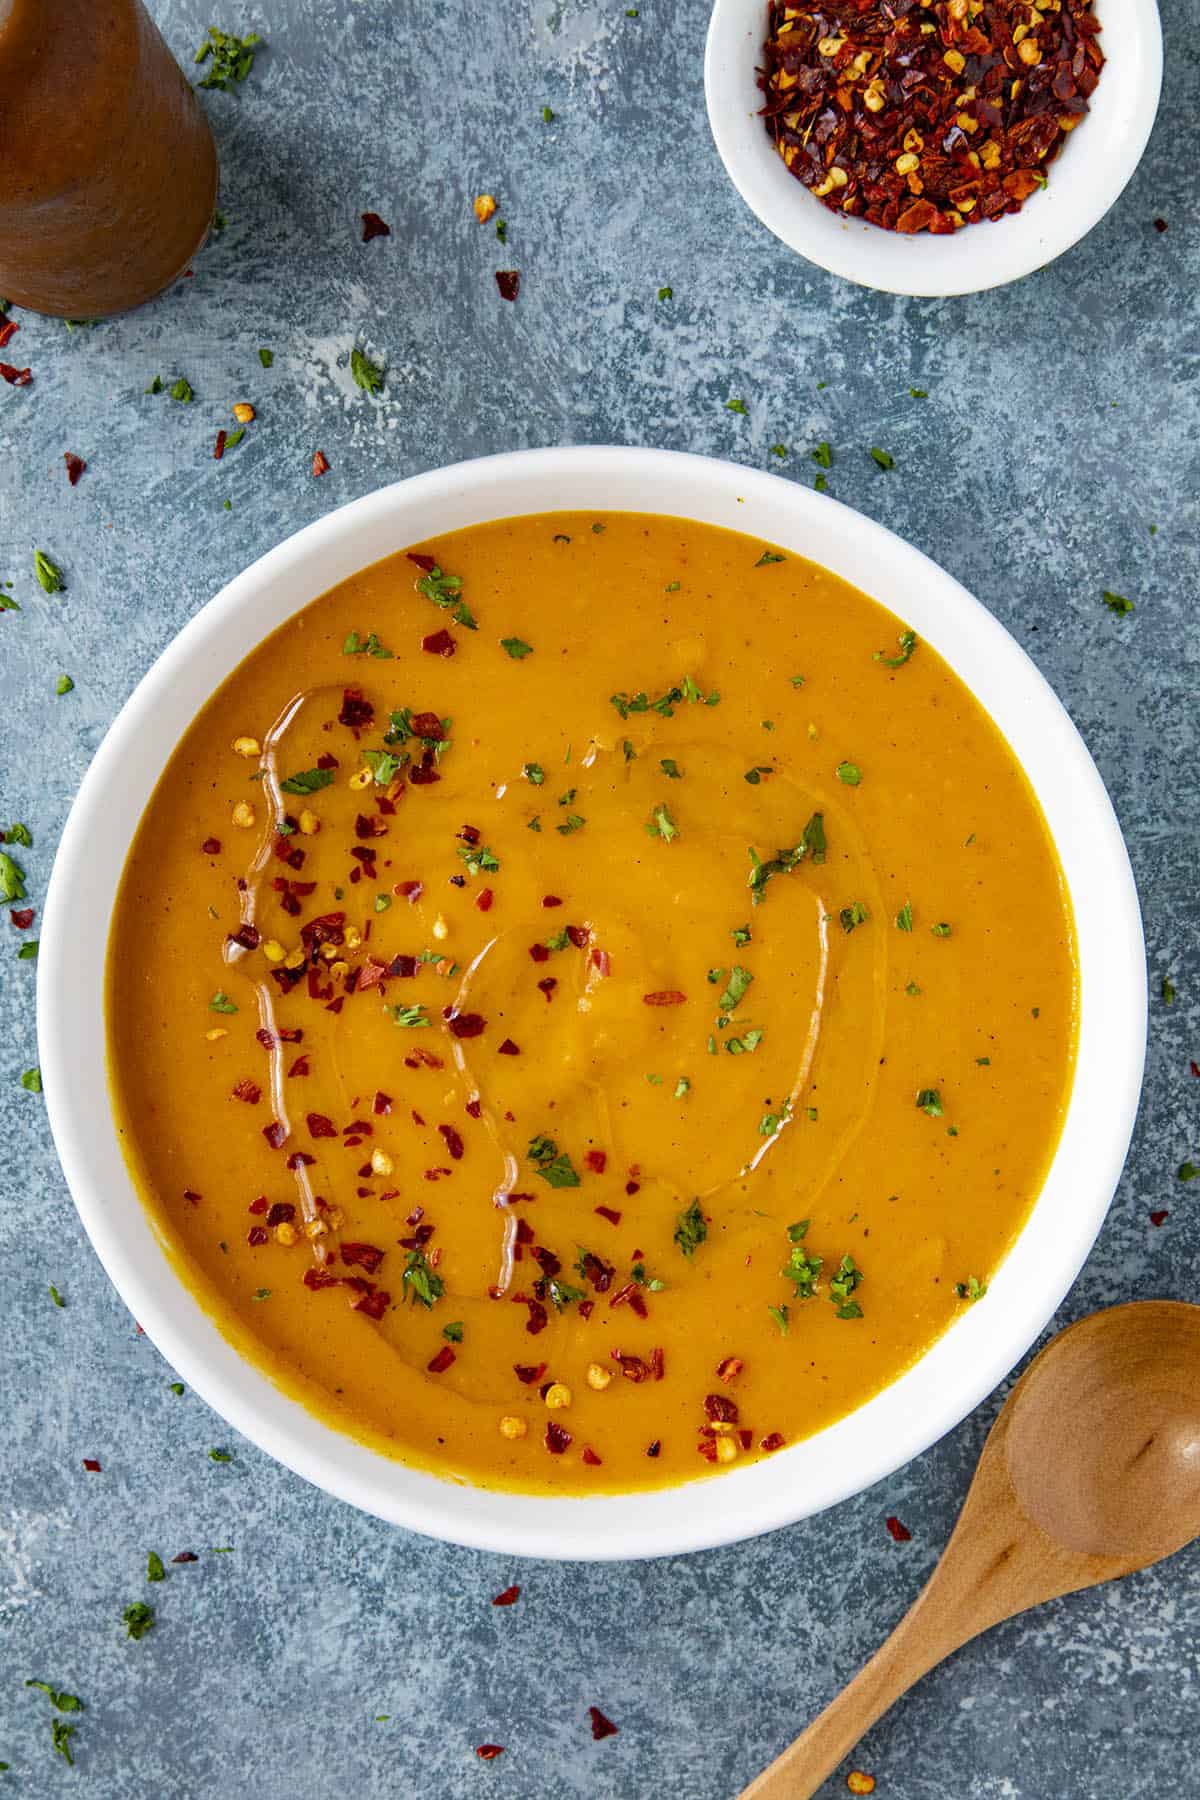 Spicy Cajun-Style Carrot Soup in a bowl with chili flakes and a drizzle of olive oil